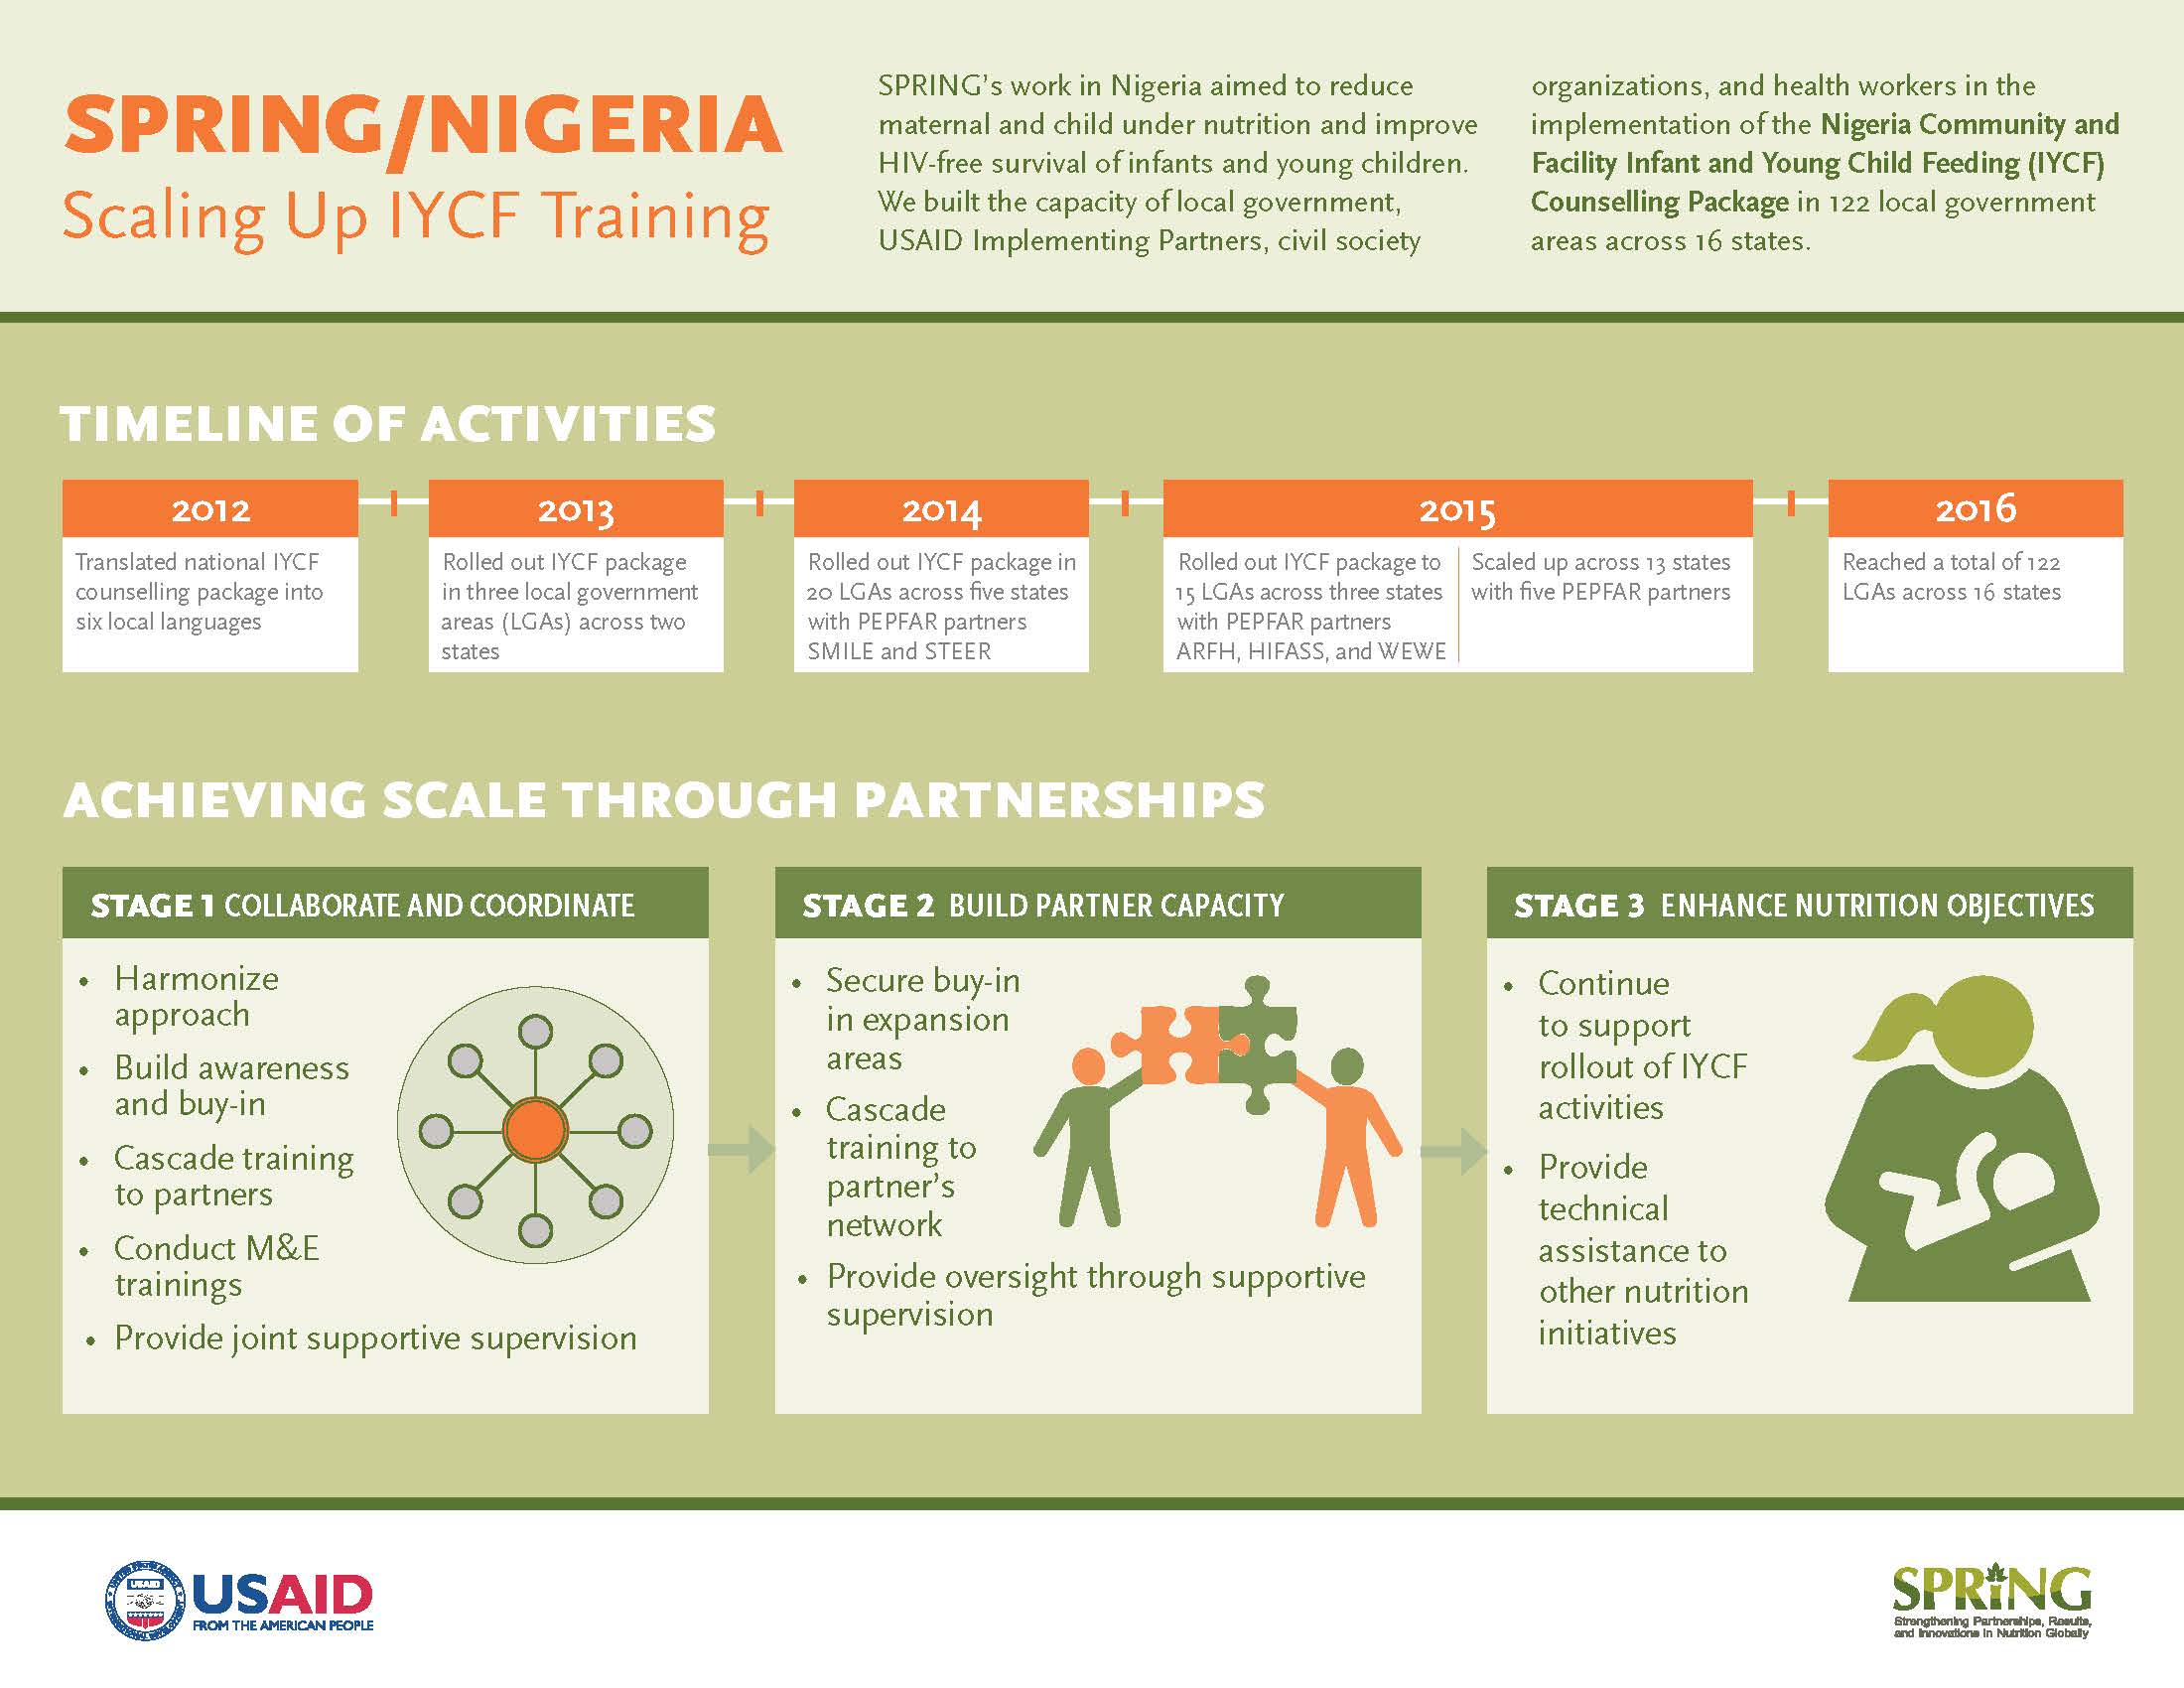 SPRING/Nigeria - Scaling Up IYCF Training page 1